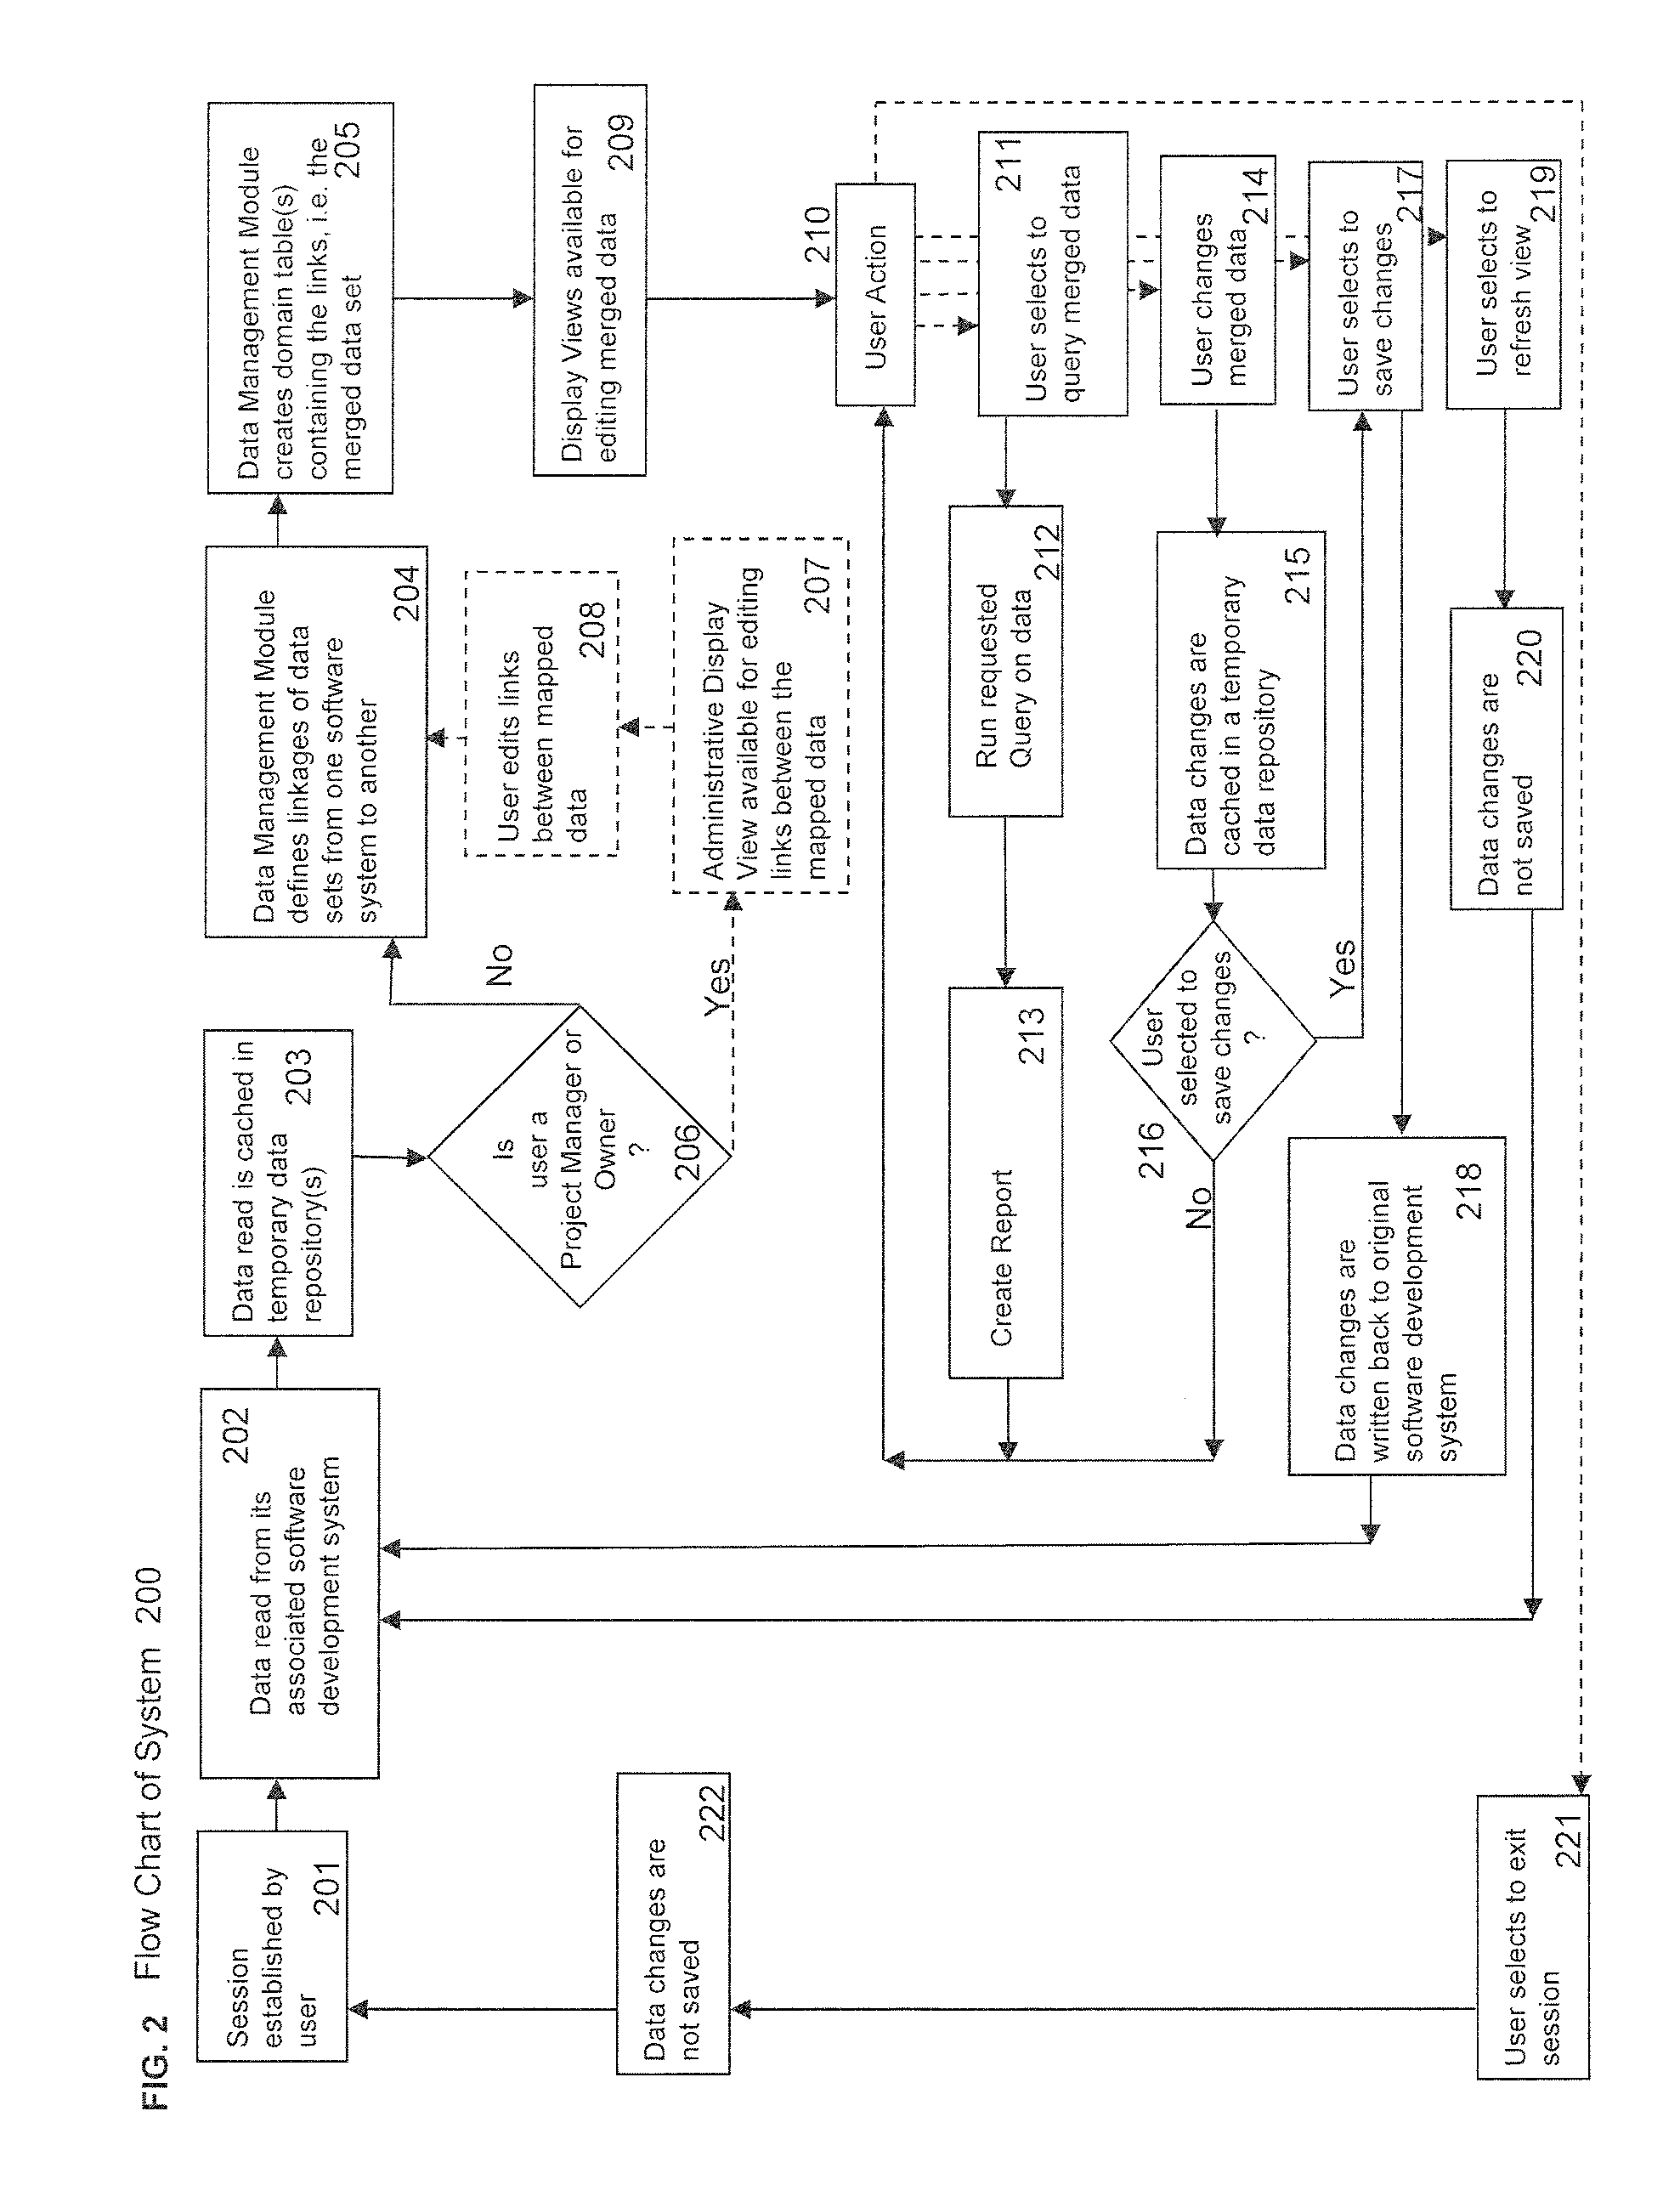 System and method for providing access to data in a plurality of software development systems